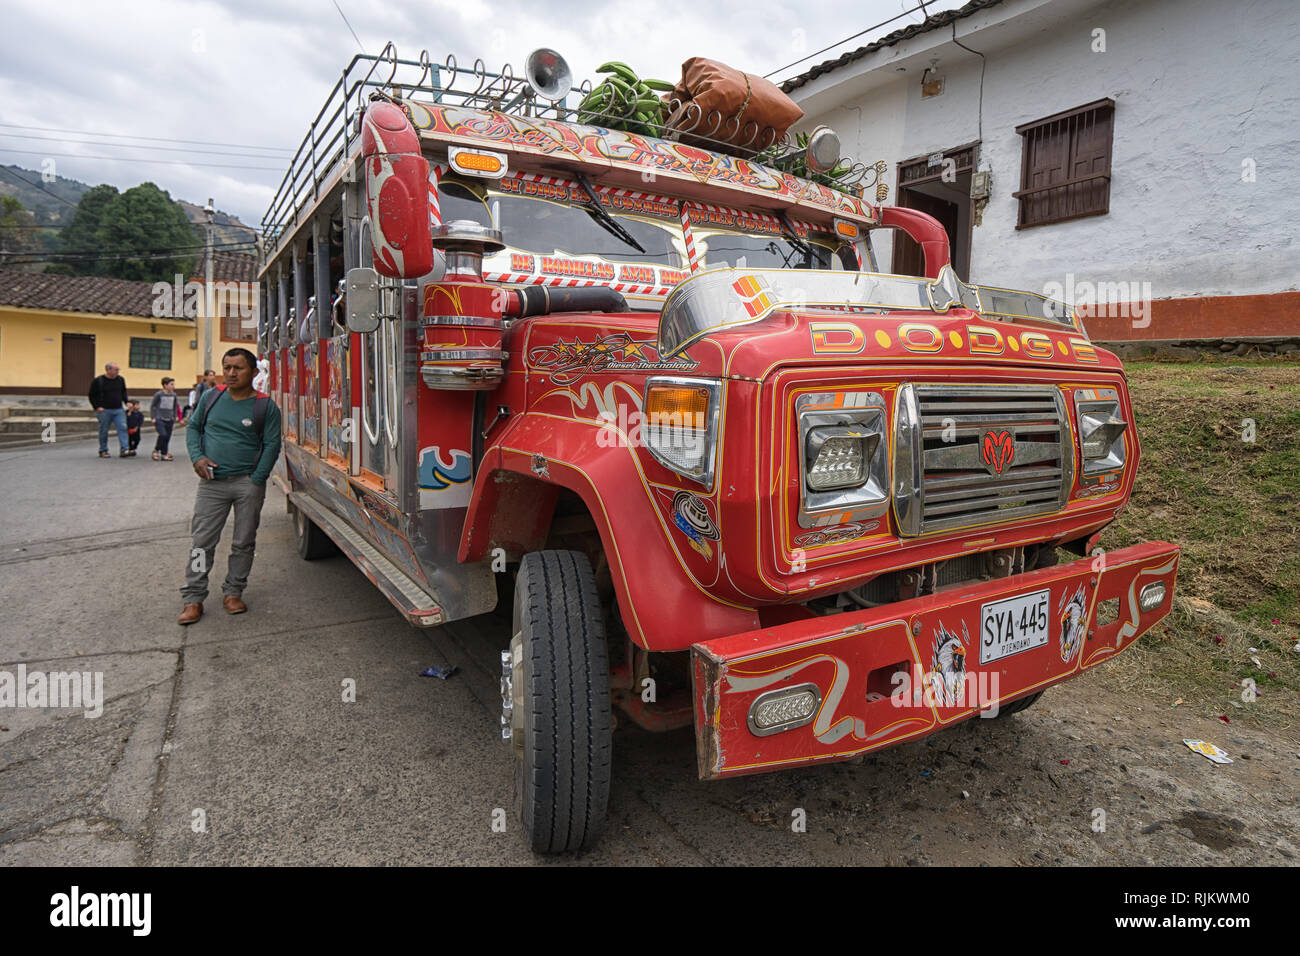 Silvia, Colombia - September 11, 2018: man standing by an old colurful school bus converted to public transportation Stock Photo